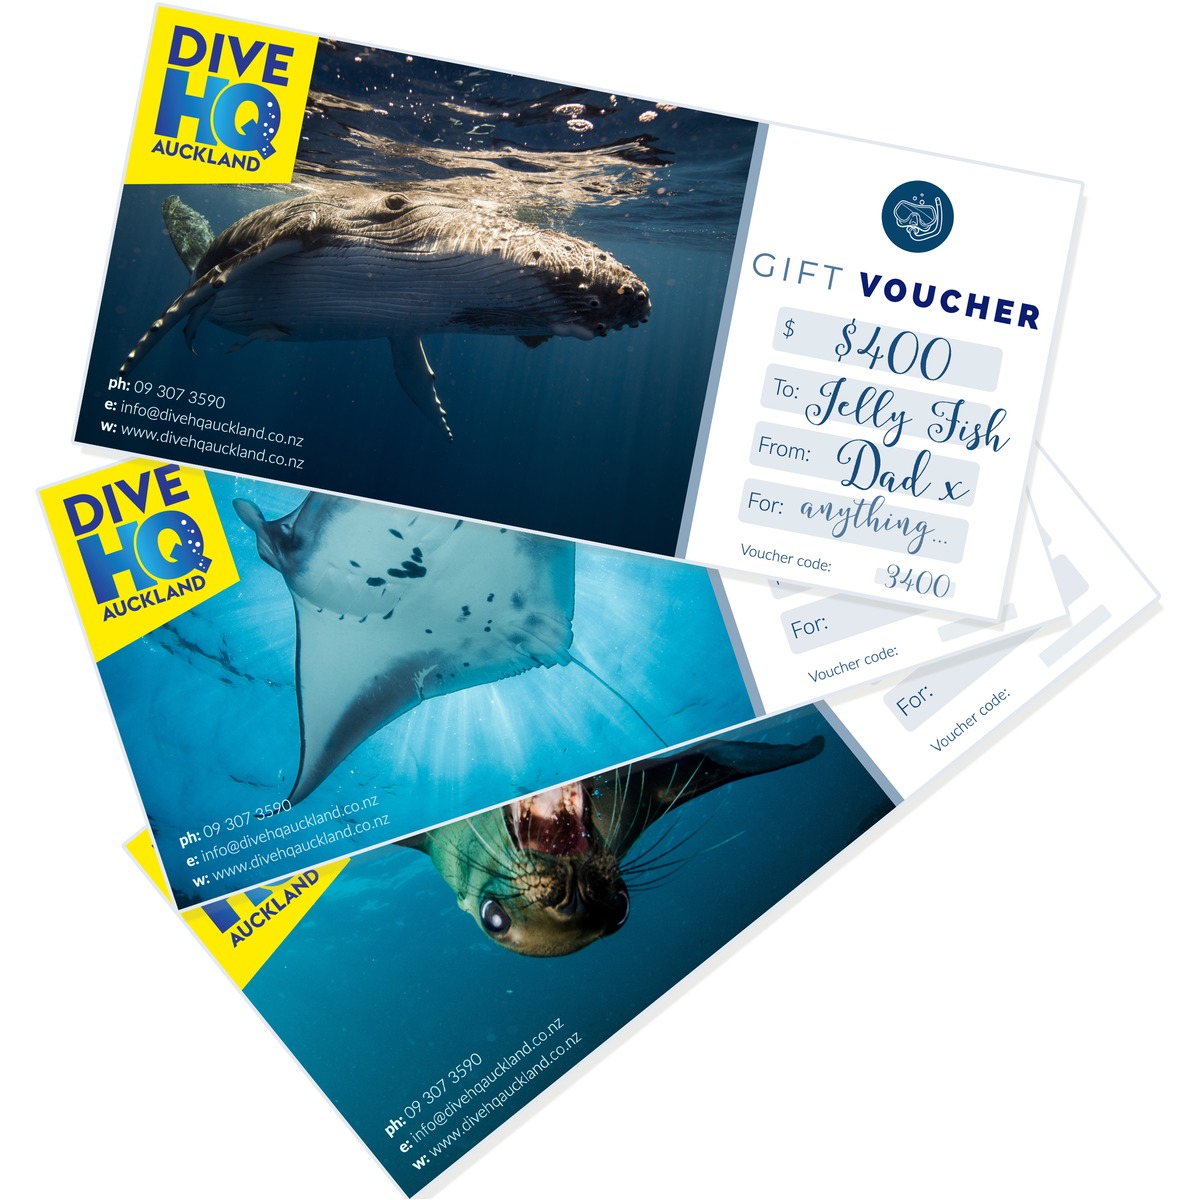 PADI Advanced Open Water Course Gift Voucher